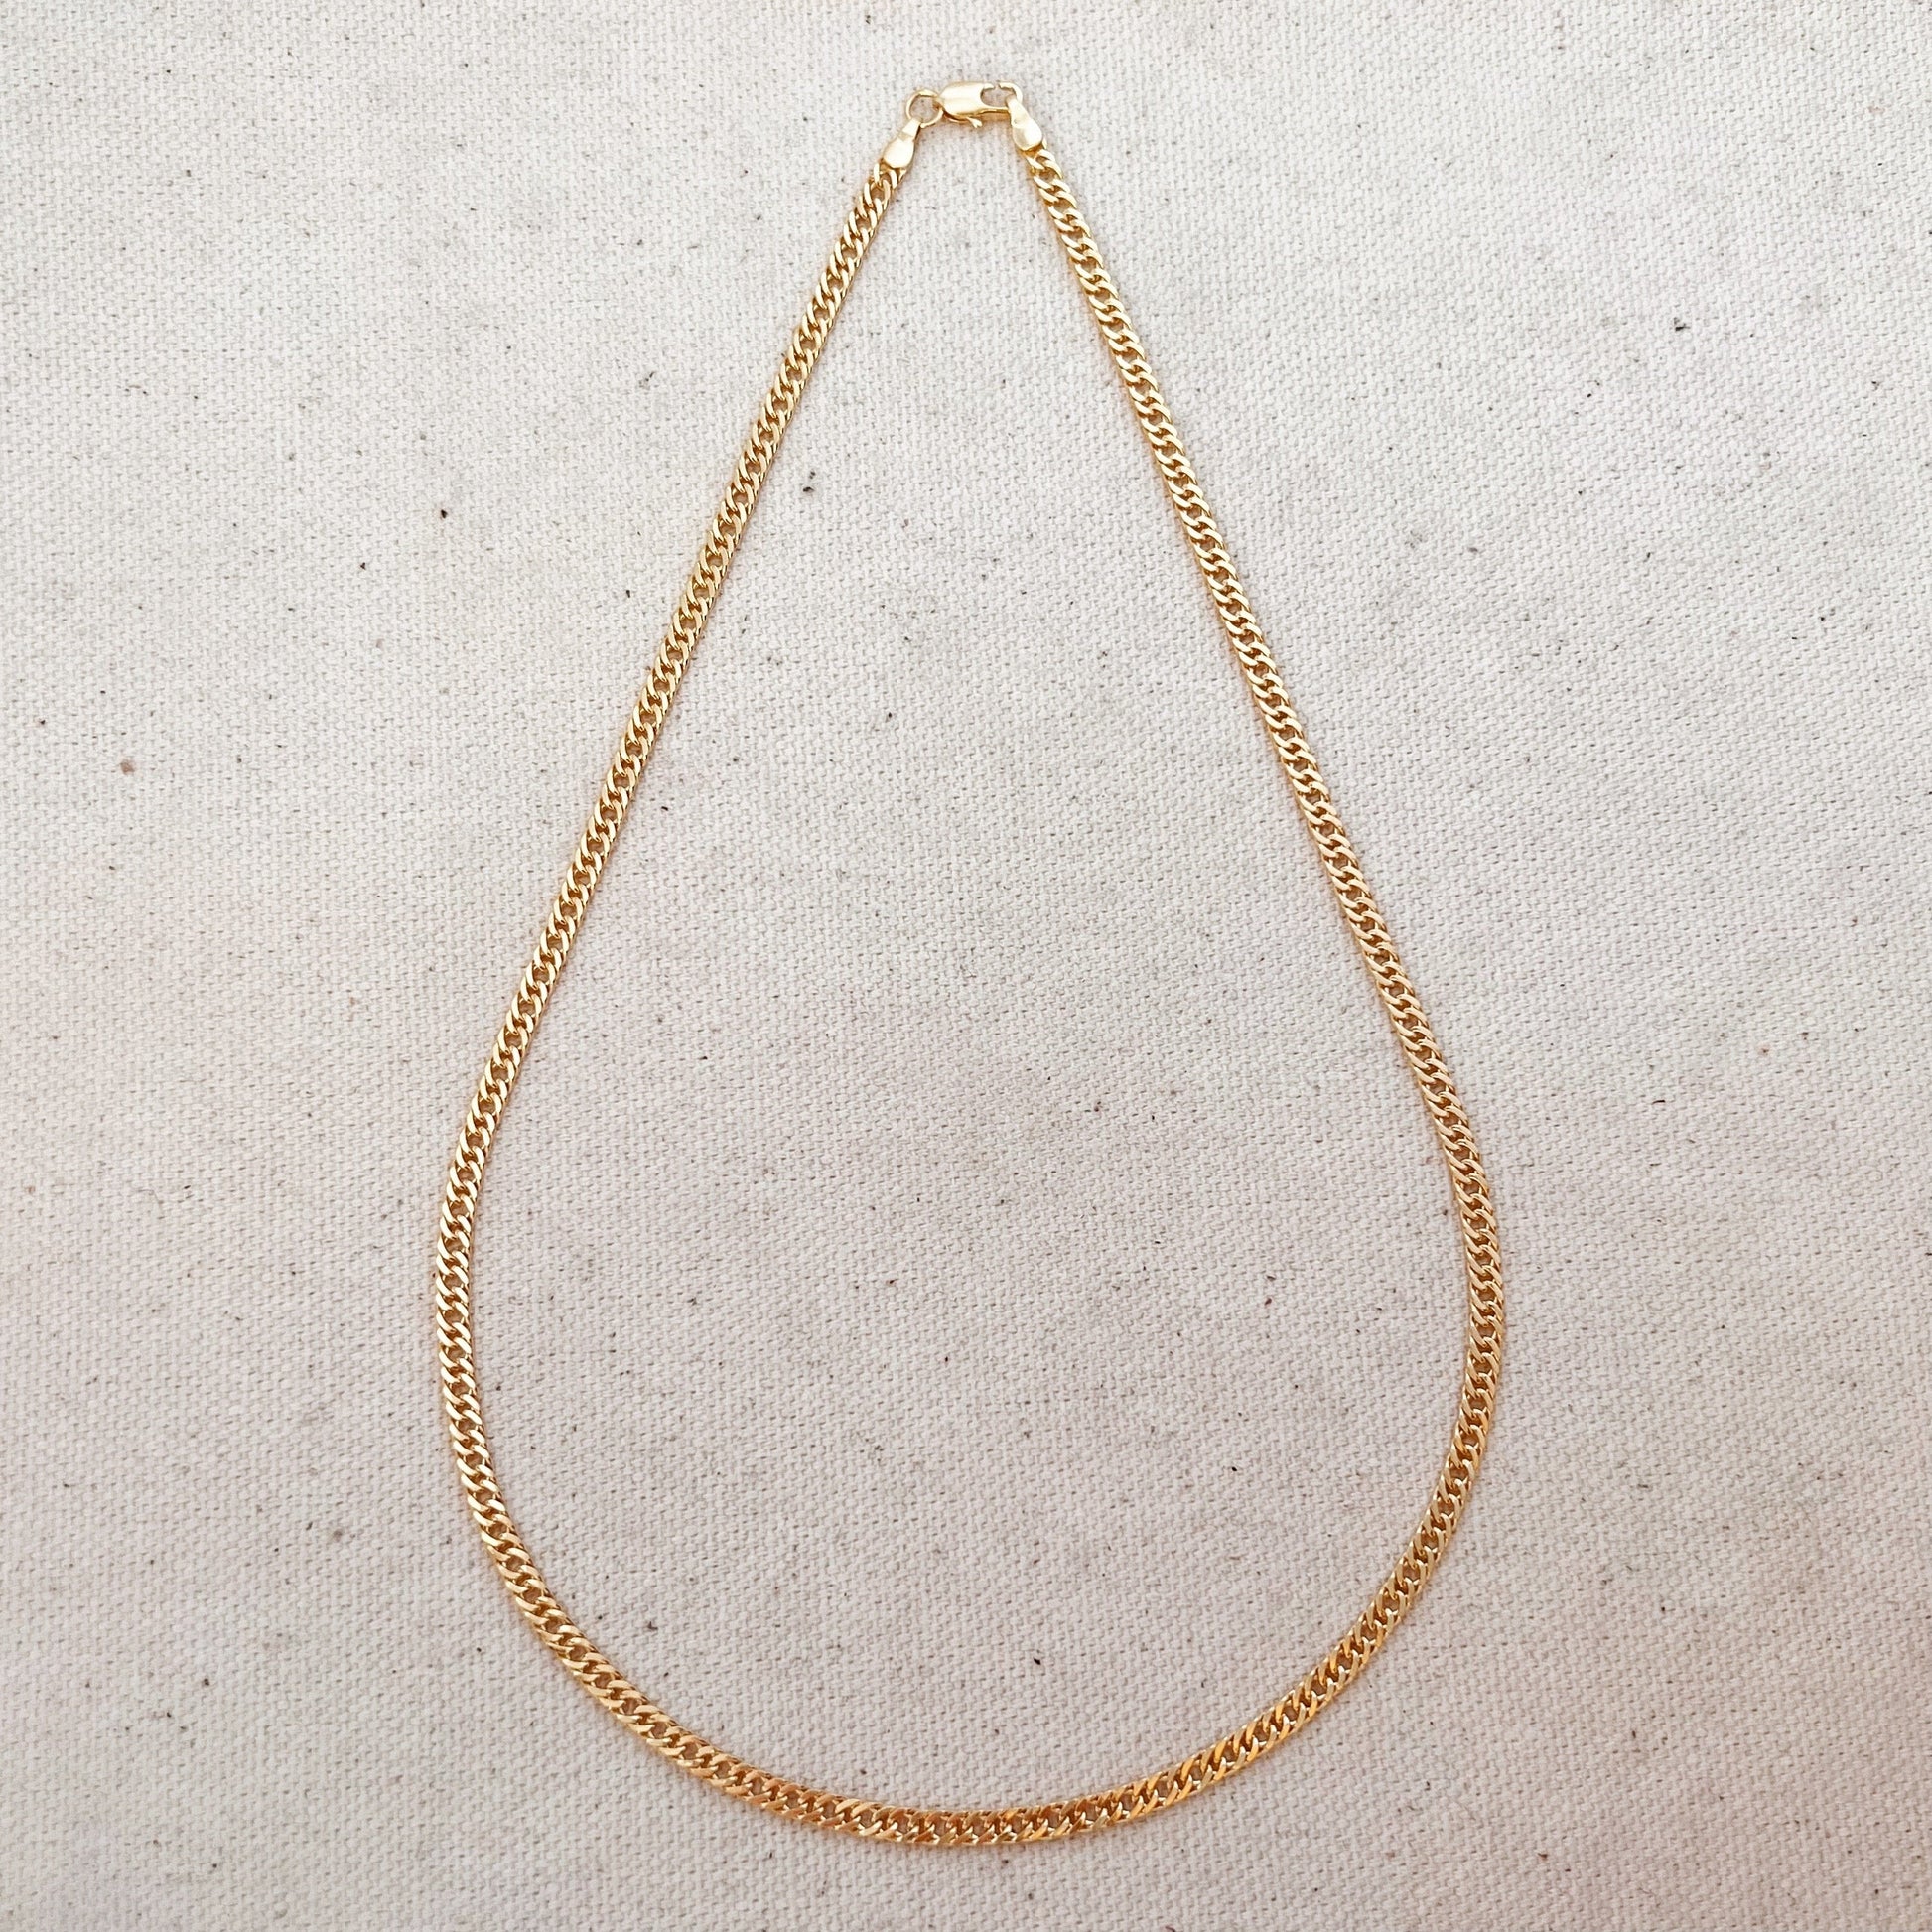 GoldFi 18k Gold Filled Double Curb Chain - Cuban